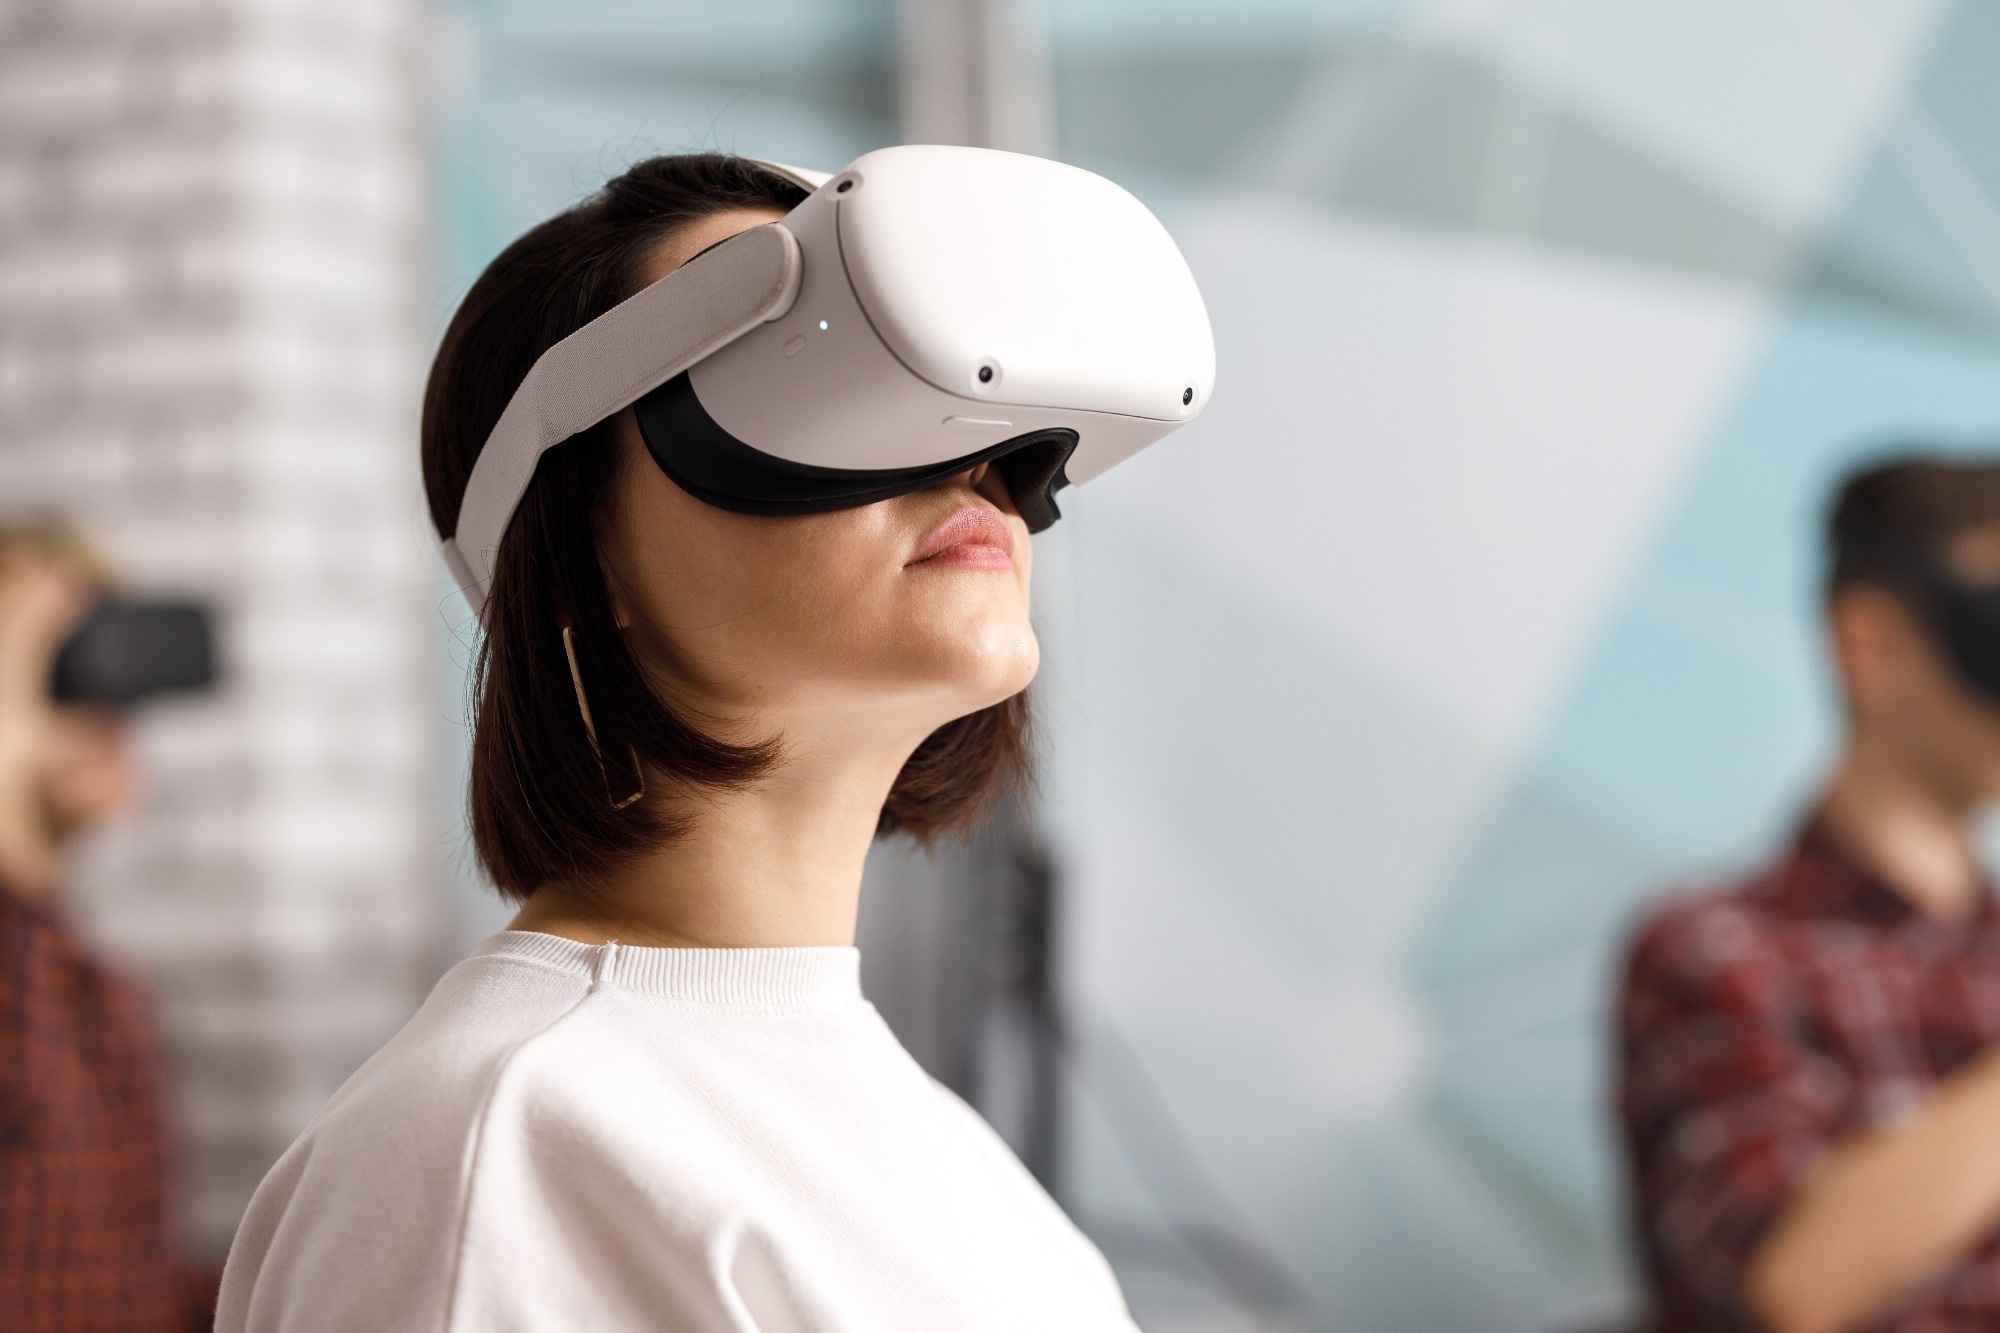 Study: Impact of virtual reality exercises on anxiety and depression in hemodialysis. Image Credit: OleksandrKhmelevskyi/Shutterstock.com